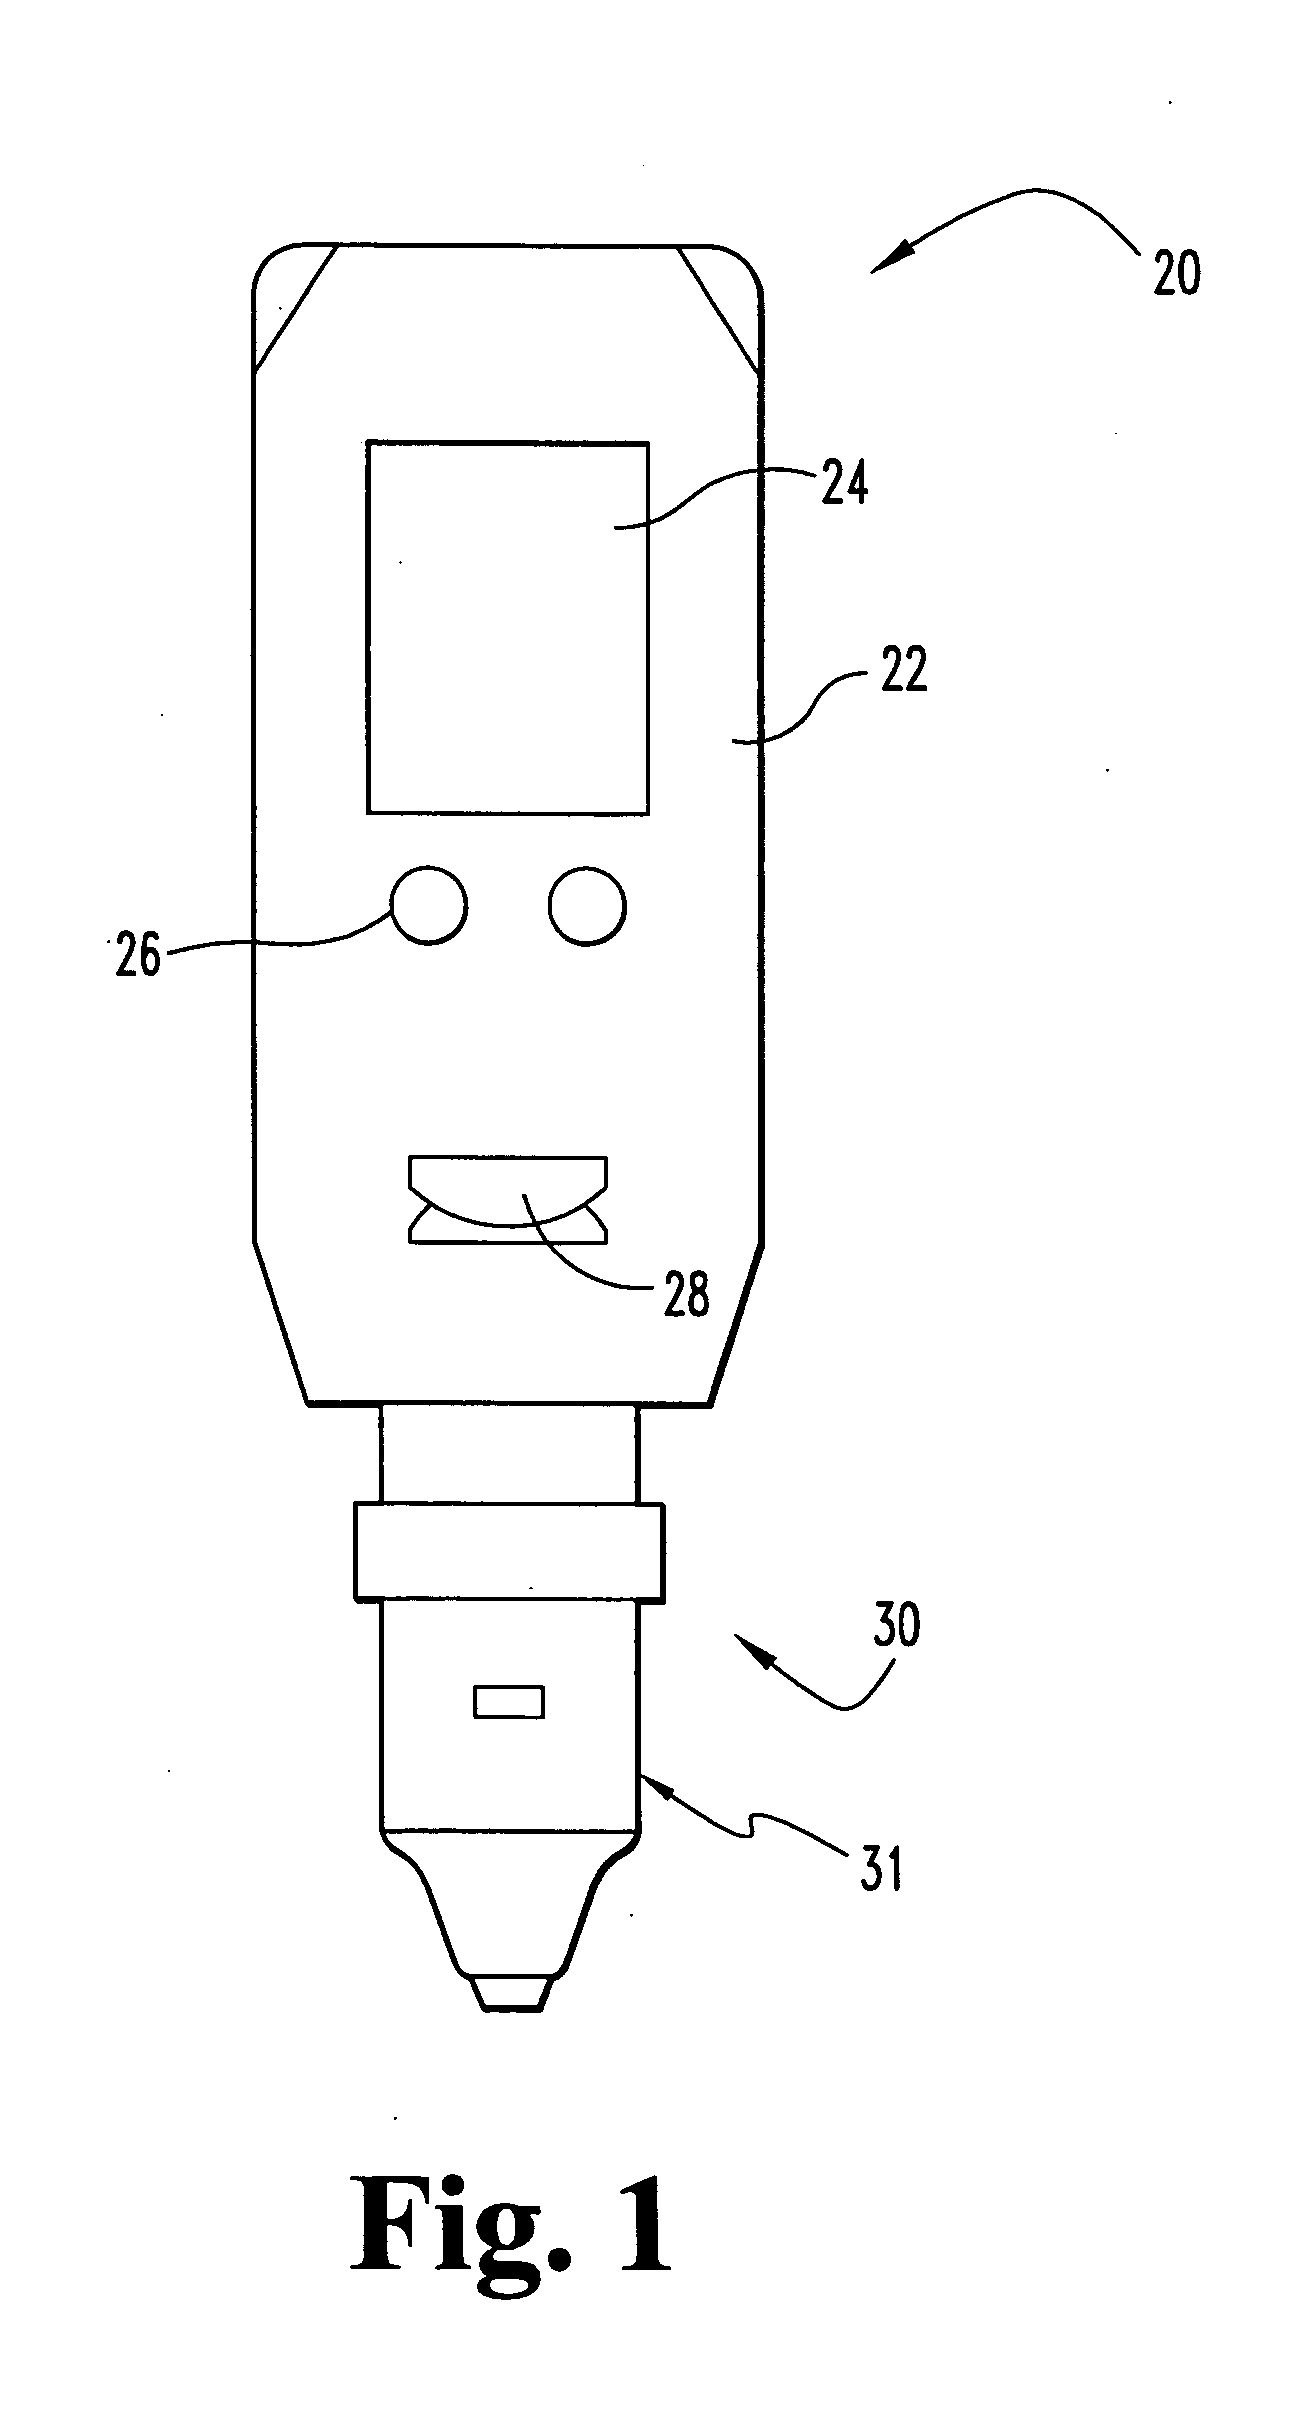 Control solution packets and methods for calibrating bodily fluid sampling devices